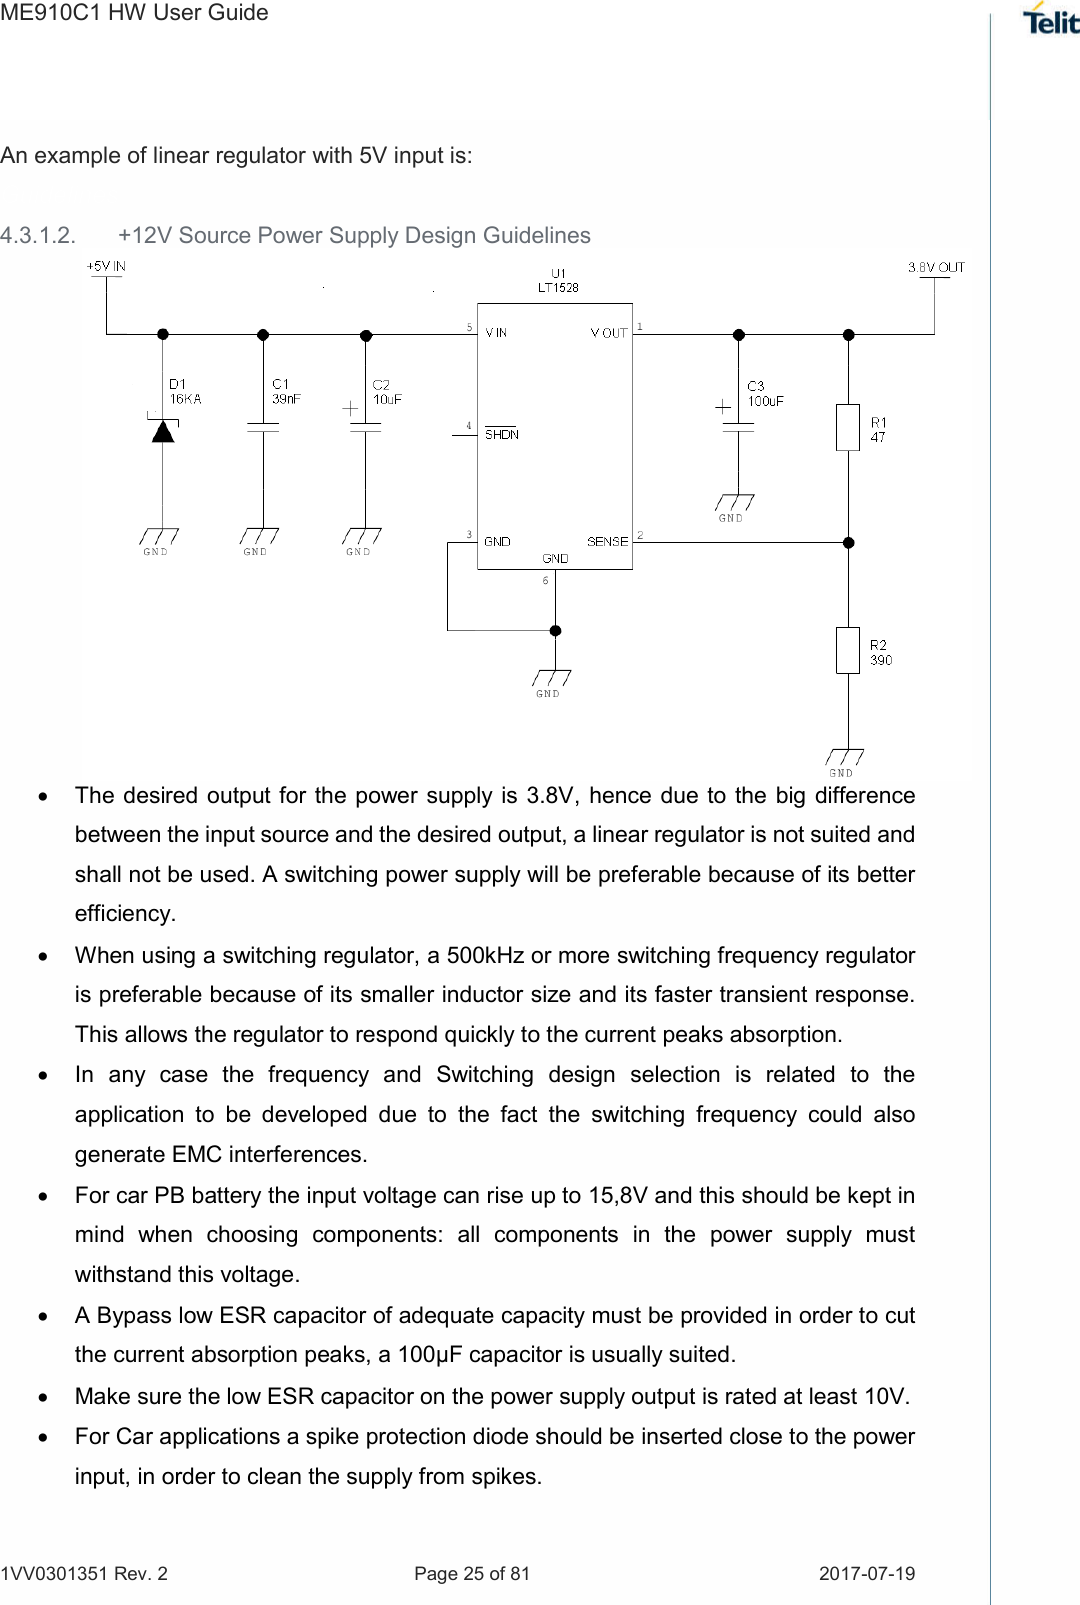 ME910C1 HW User Guide 1VV0301351 Rev. 2  Page 25 of 81  2017-07-19   An example of linear regulator with 5V input is: Guidelines 4.3.1.2.  +12V Source Power Supply Design Guidelines   The desired  output for the power supply is 3.8V, hence due to the  big difference between the input source and the desired output, a linear regulator is not suited and shall not be used. A switching power supply will be preferable because of its better efficiency.   When using a switching regulator, a 500kHz or more switching frequency regulator is preferable because of its smaller inductor size and its faster transient response. This allows the regulator to respond quickly to the current peaks absorption.    In  any  case  the  frequency  and  Switching  design  selection  is  related  to  the application  to  be  developed  due  to  the  fact  the  switching  frequency  could  also generate EMC interferences.   For car PB battery the input voltage can rise up to 15,8V and this should be kept in mind  when  choosing  components:  all  components  in  the  power  supply  must withstand this voltage.   A Bypass low ESR capacitor of adequate capacity must be provided in order to cut the current absorption peaks, a 100μF capacitor is usually suited.   Make sure the low ESR capacitor on the power supply output is rated at least 10V.   For Car applications a spike protection diode should be inserted close to the power input, in order to clean the supply from spikes.   